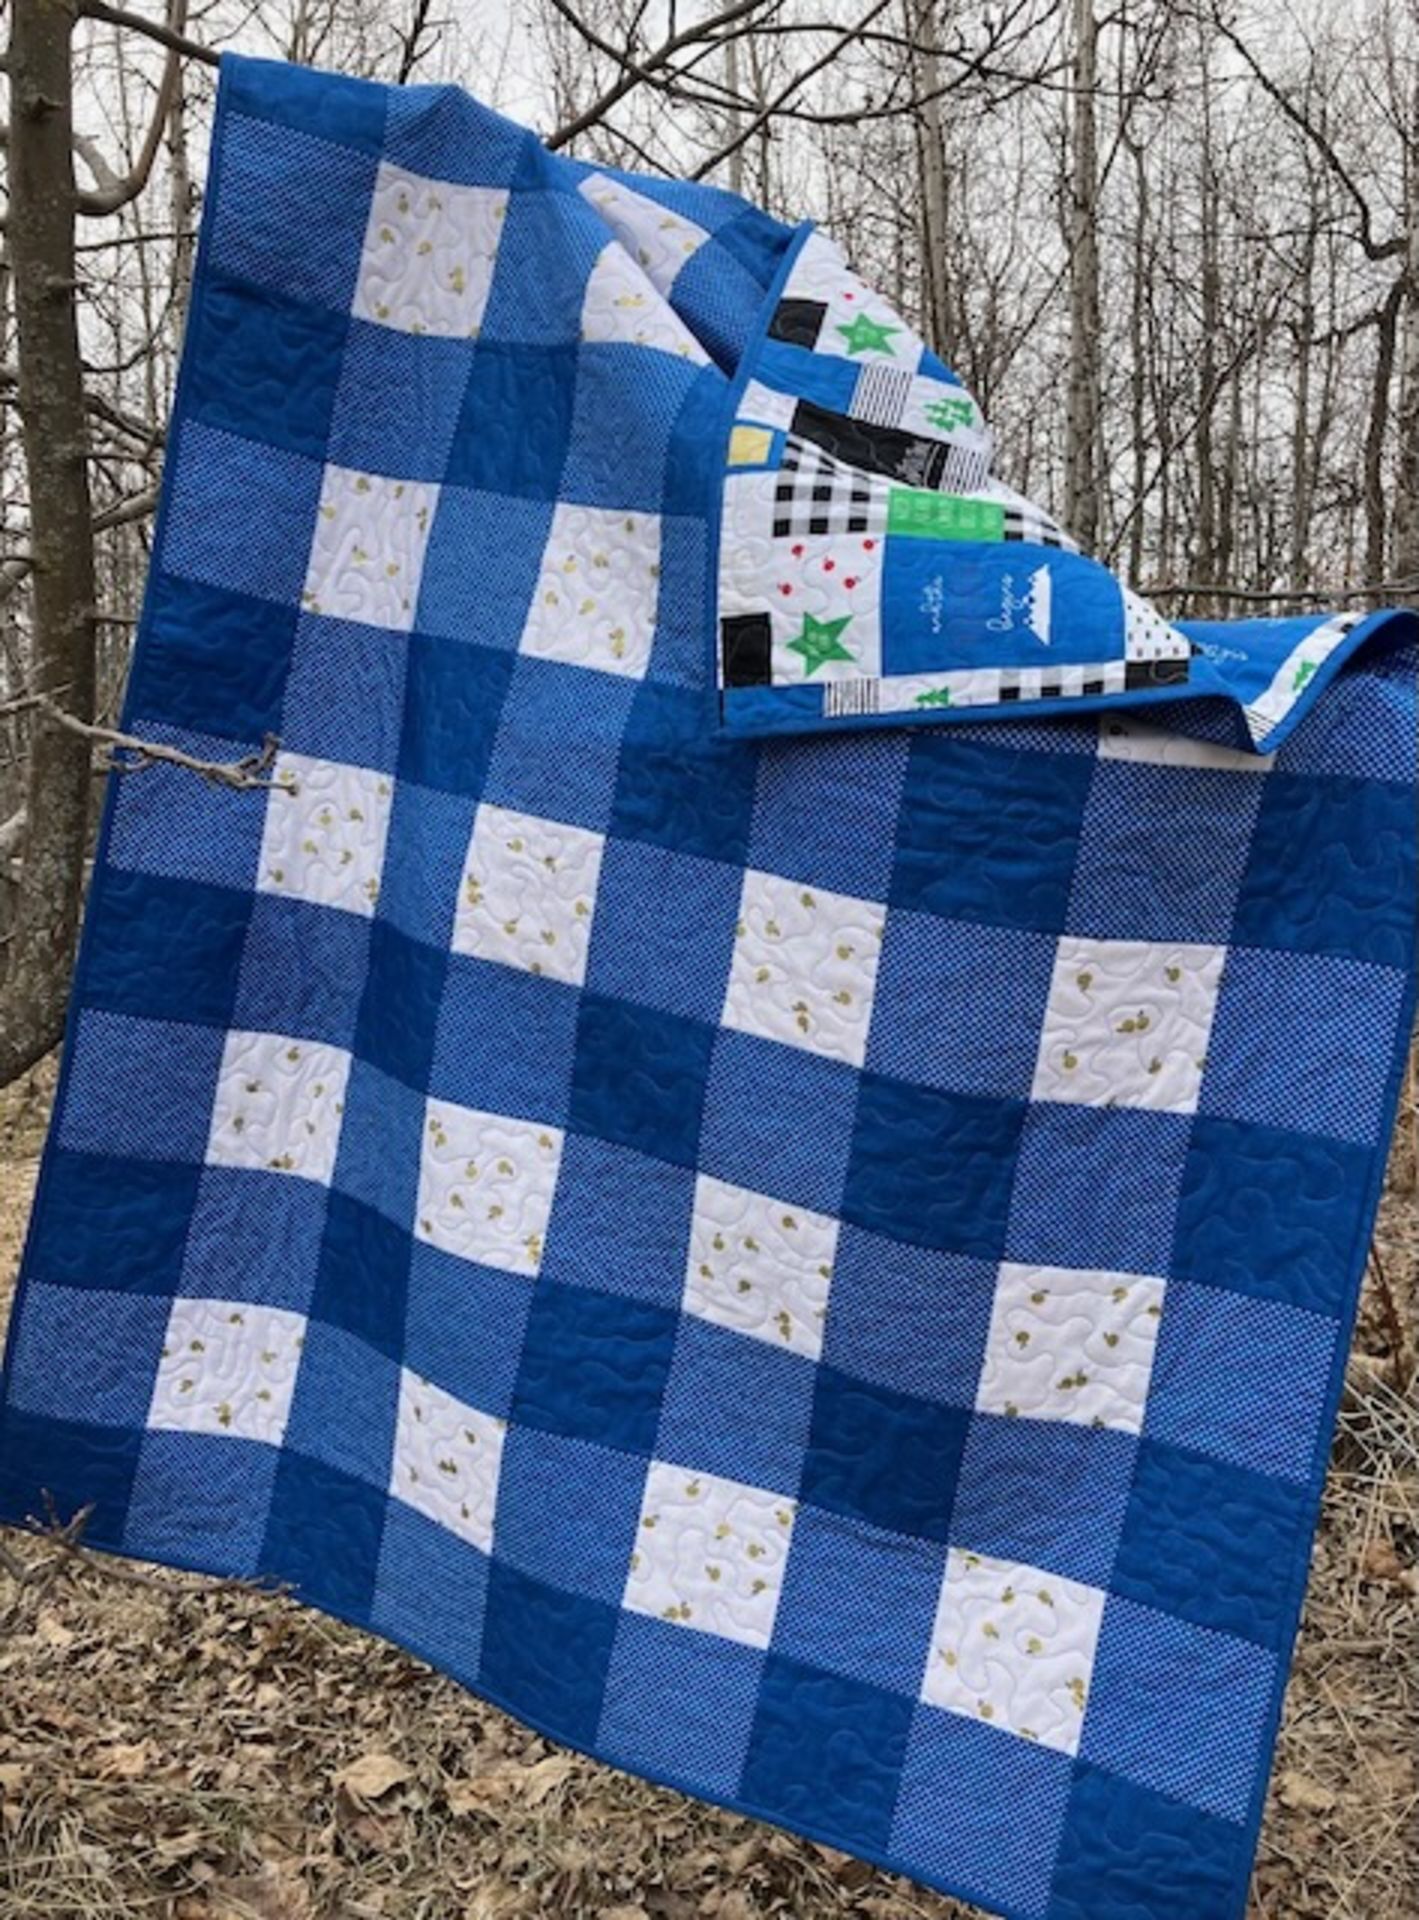 HOMEMADE GINGHAM QUILT (40 1/2" x 58 1/2") - Image 2 of 4